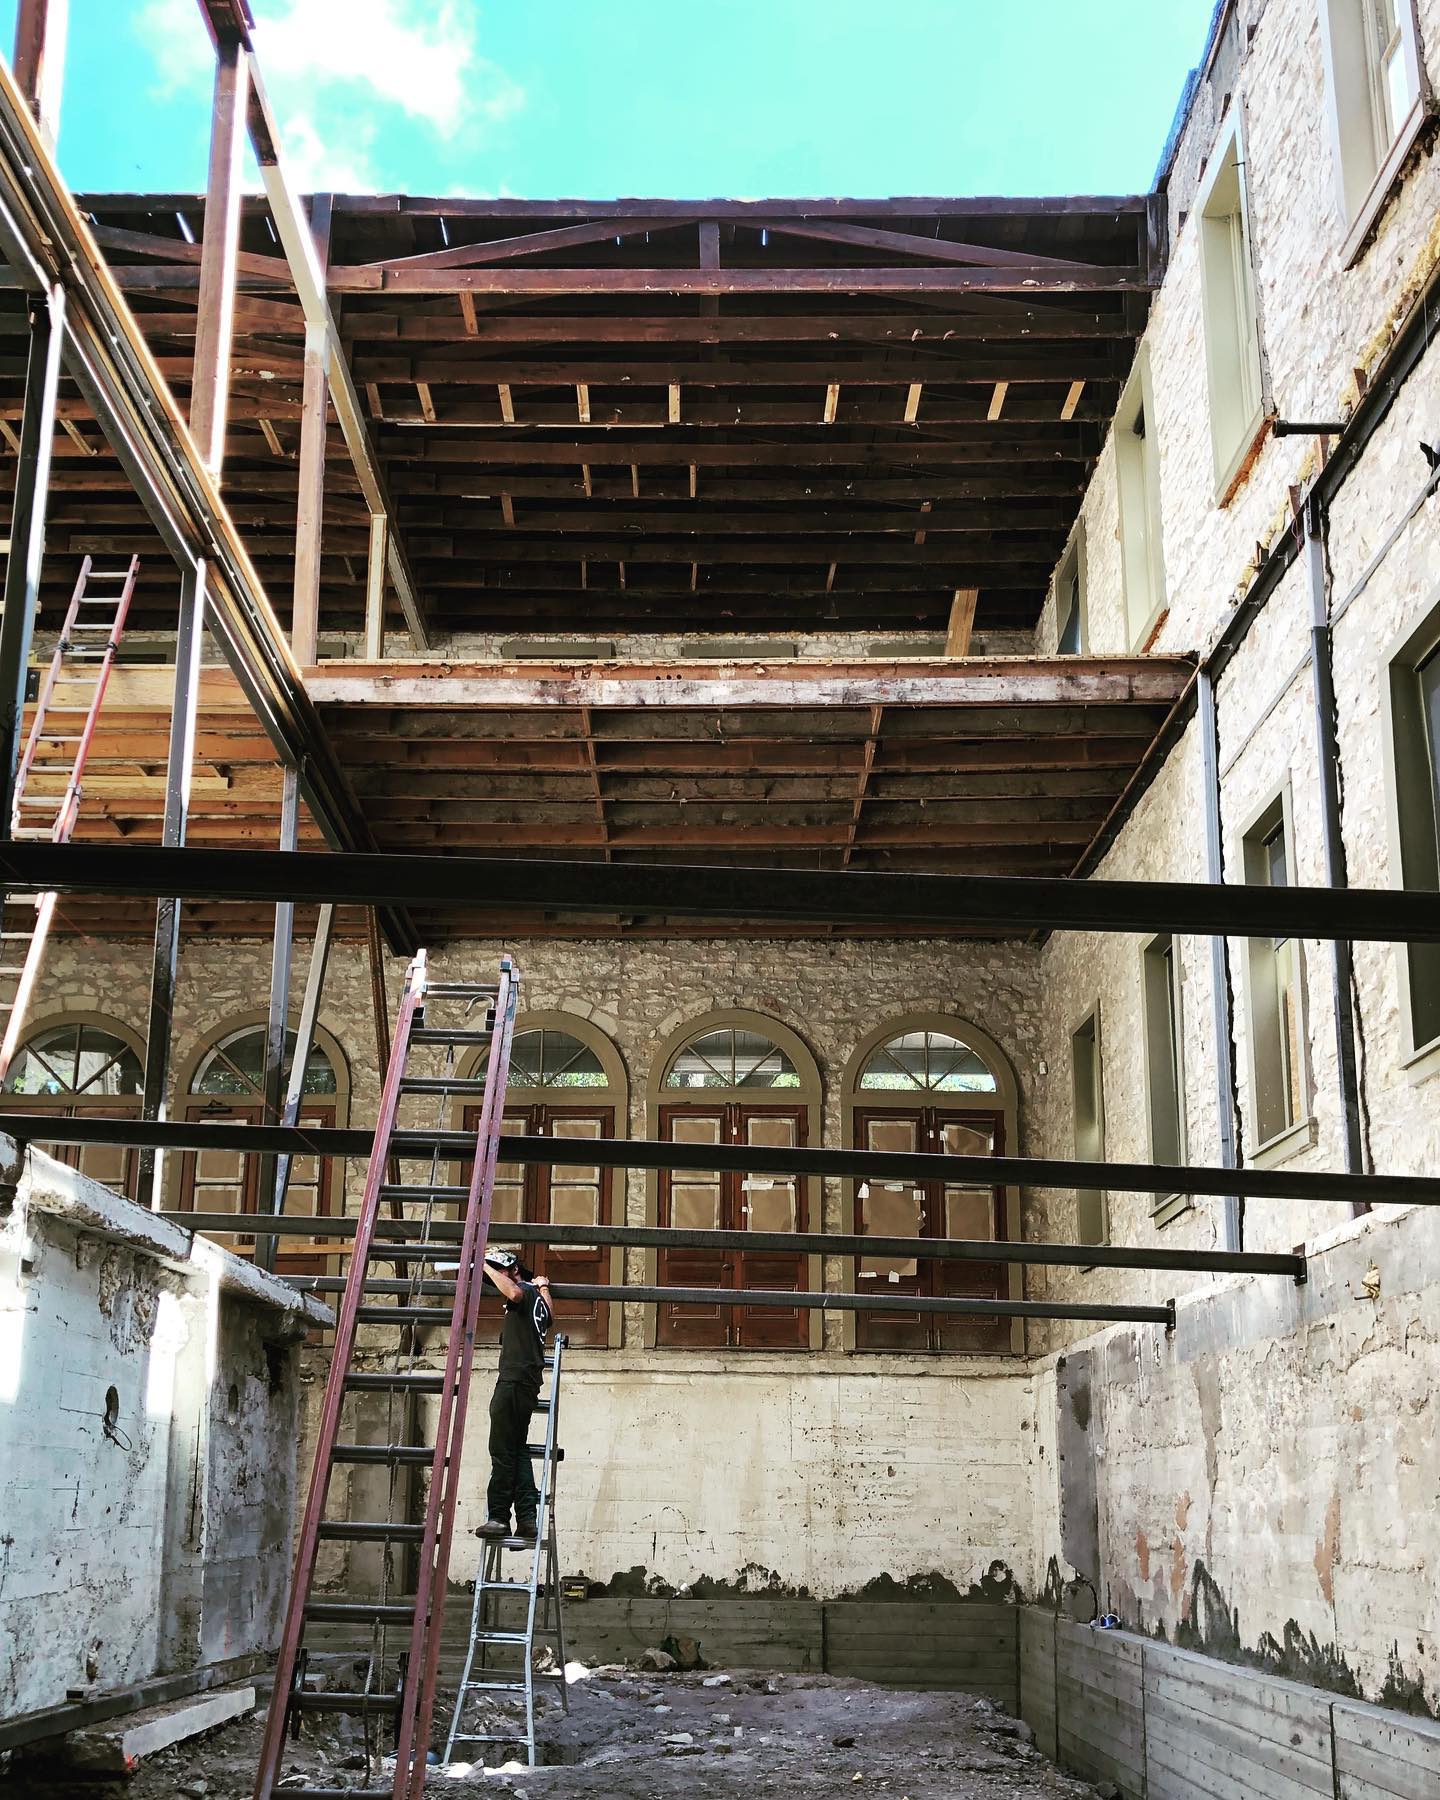 Should me make it a skylight!? Oh wait there’s another floor going on top of this 120 yr old building!